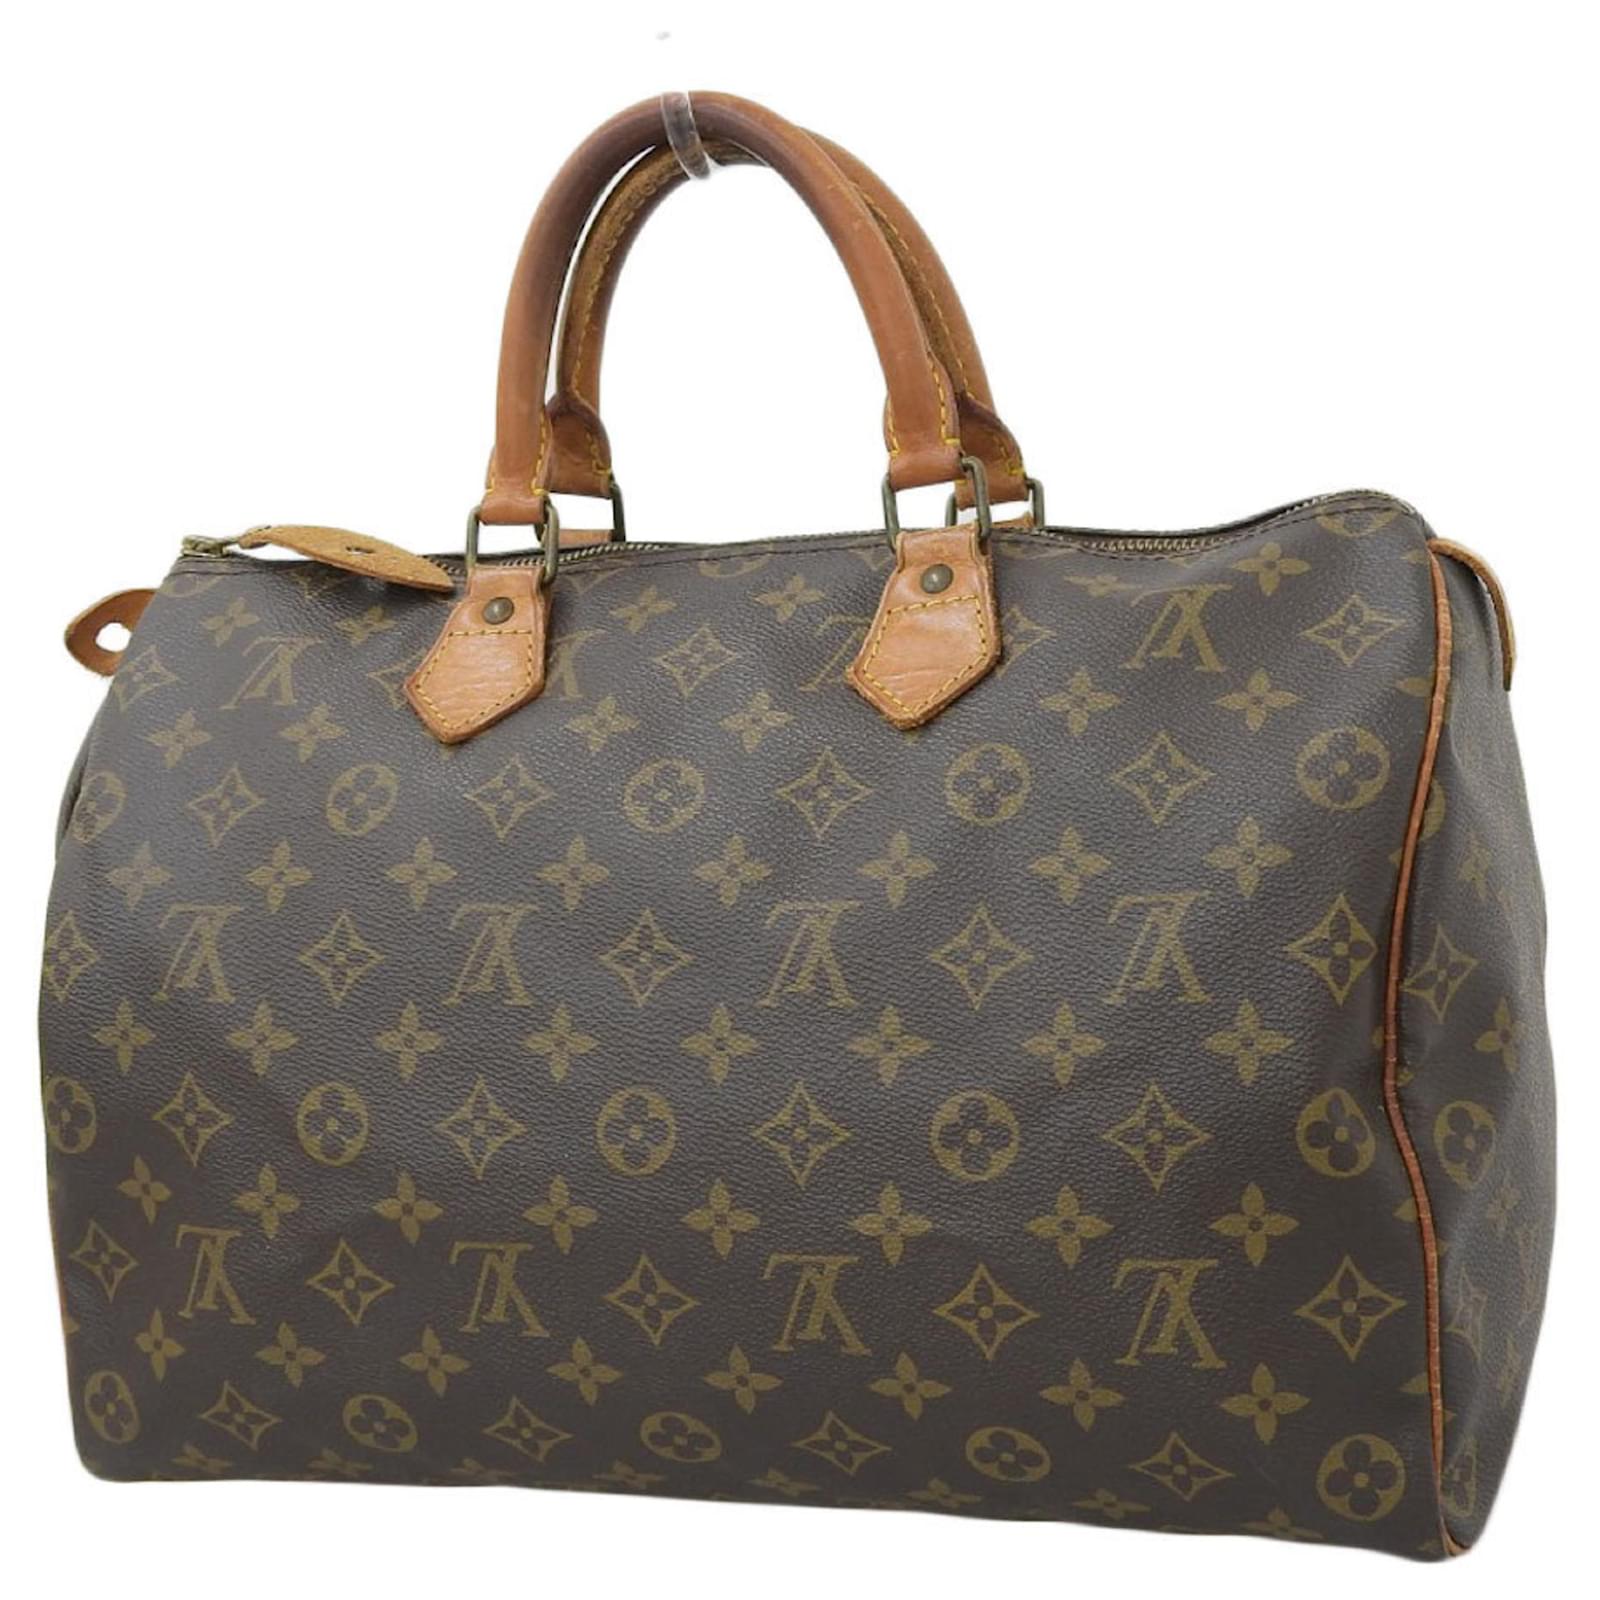 Louis Vuitton Speedy 35 Perfect Condition - clothing & accessories